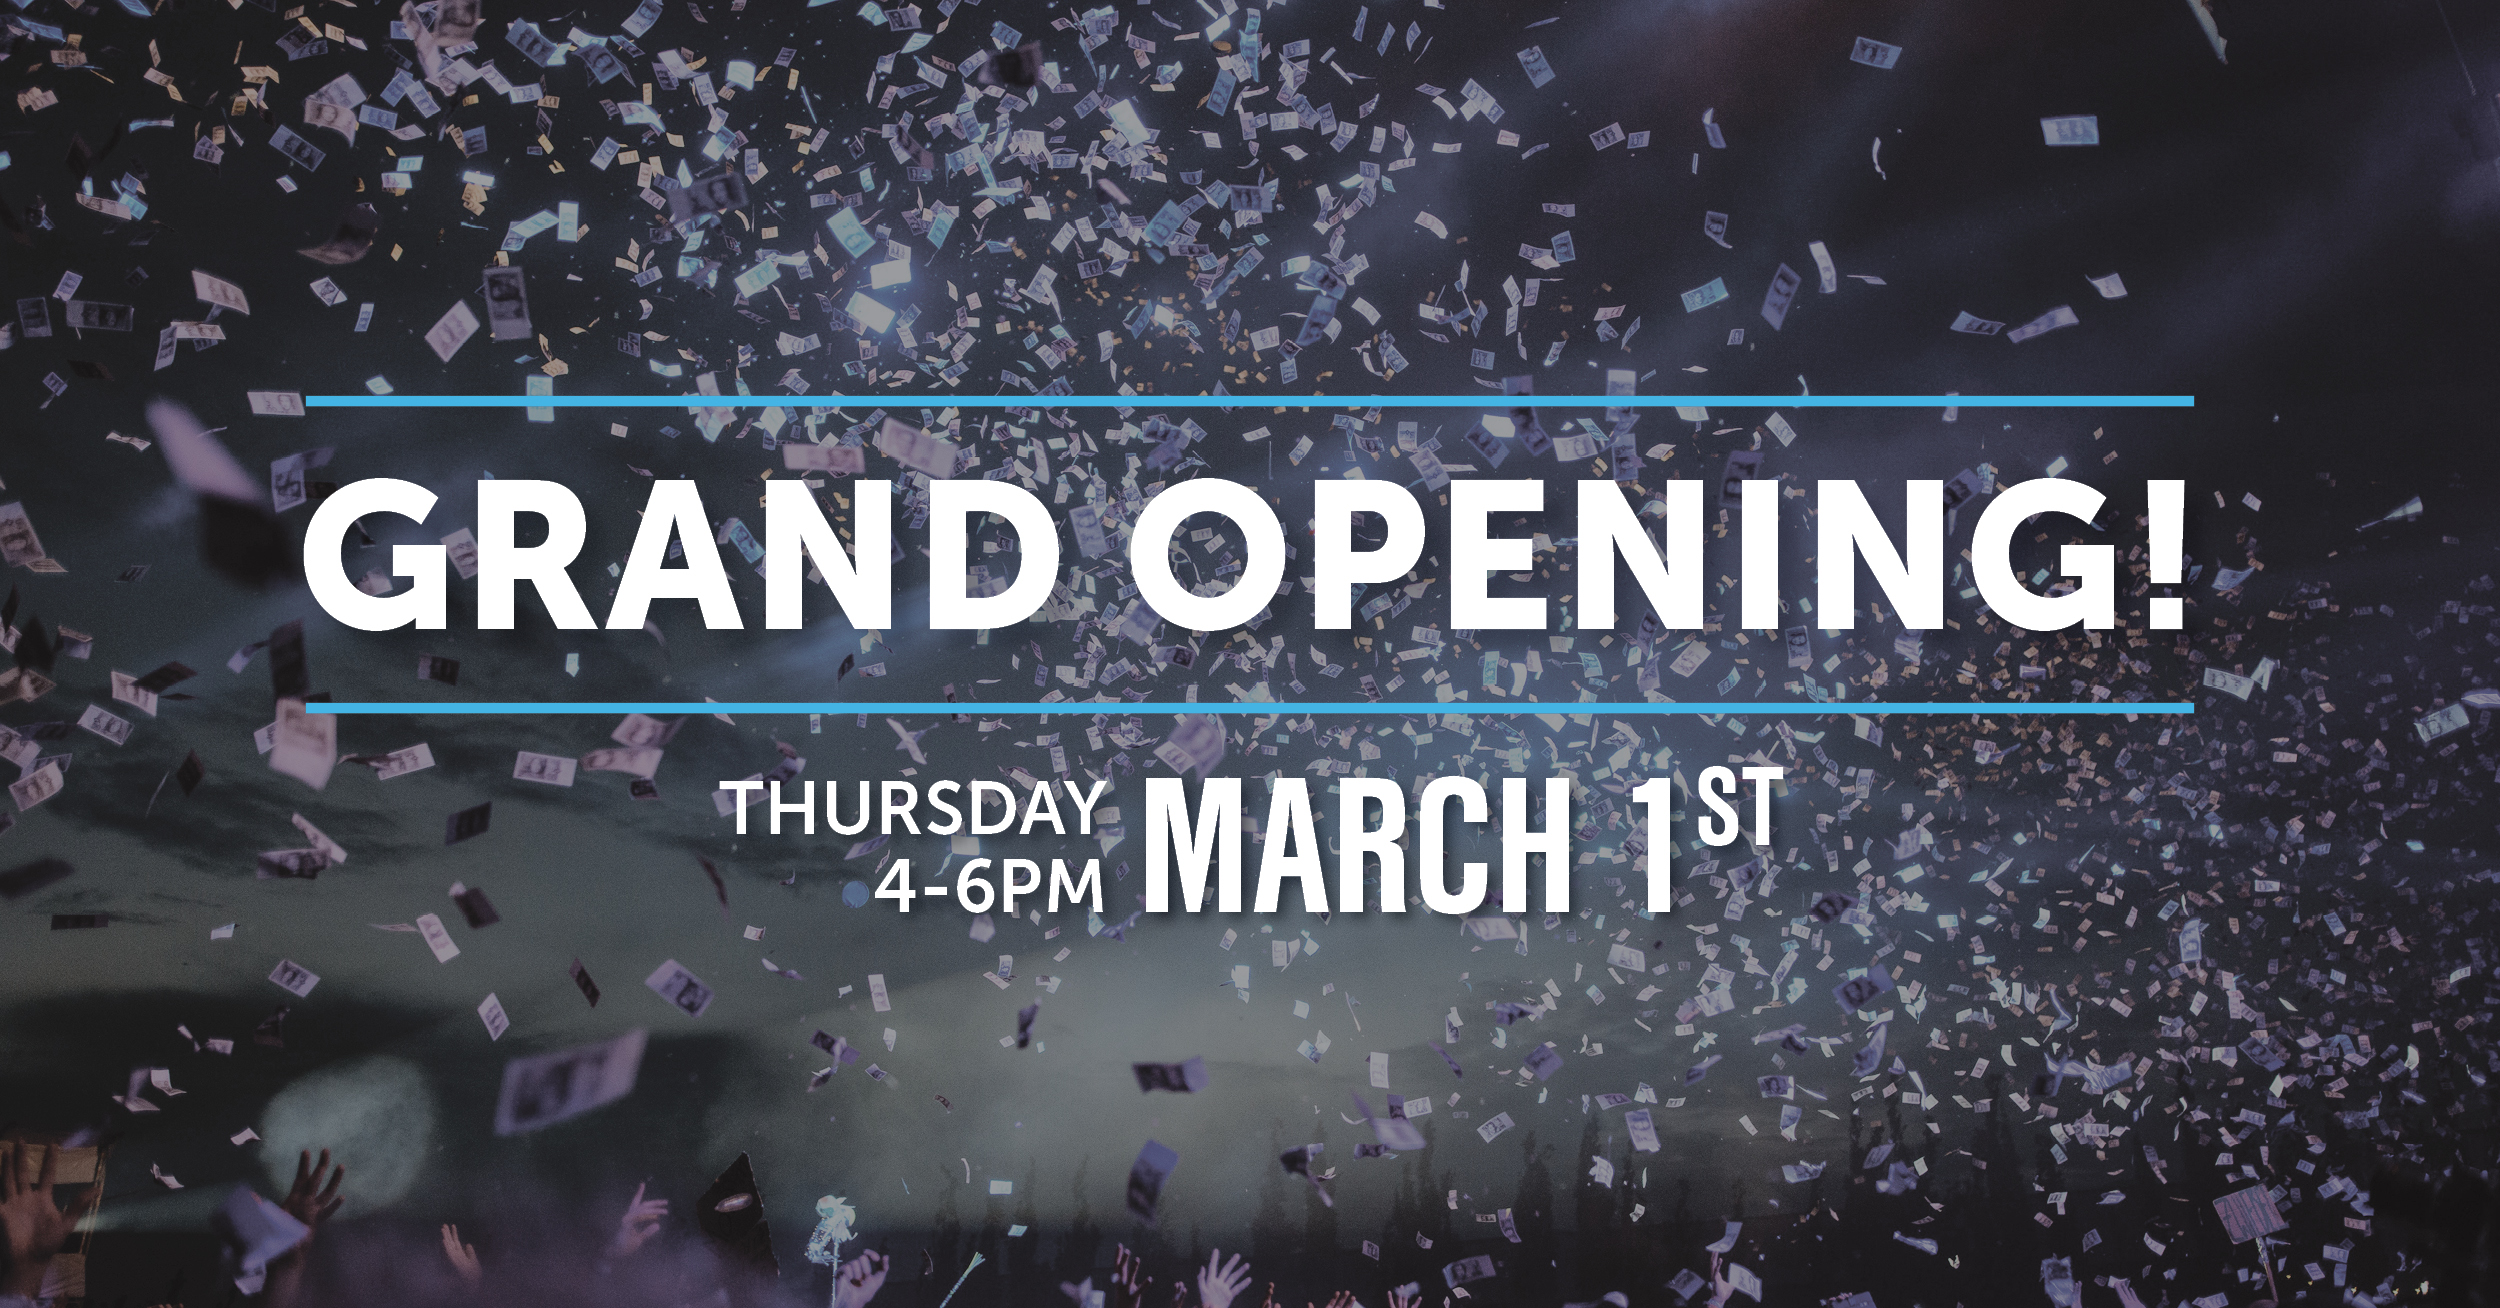 Grand opening graphic